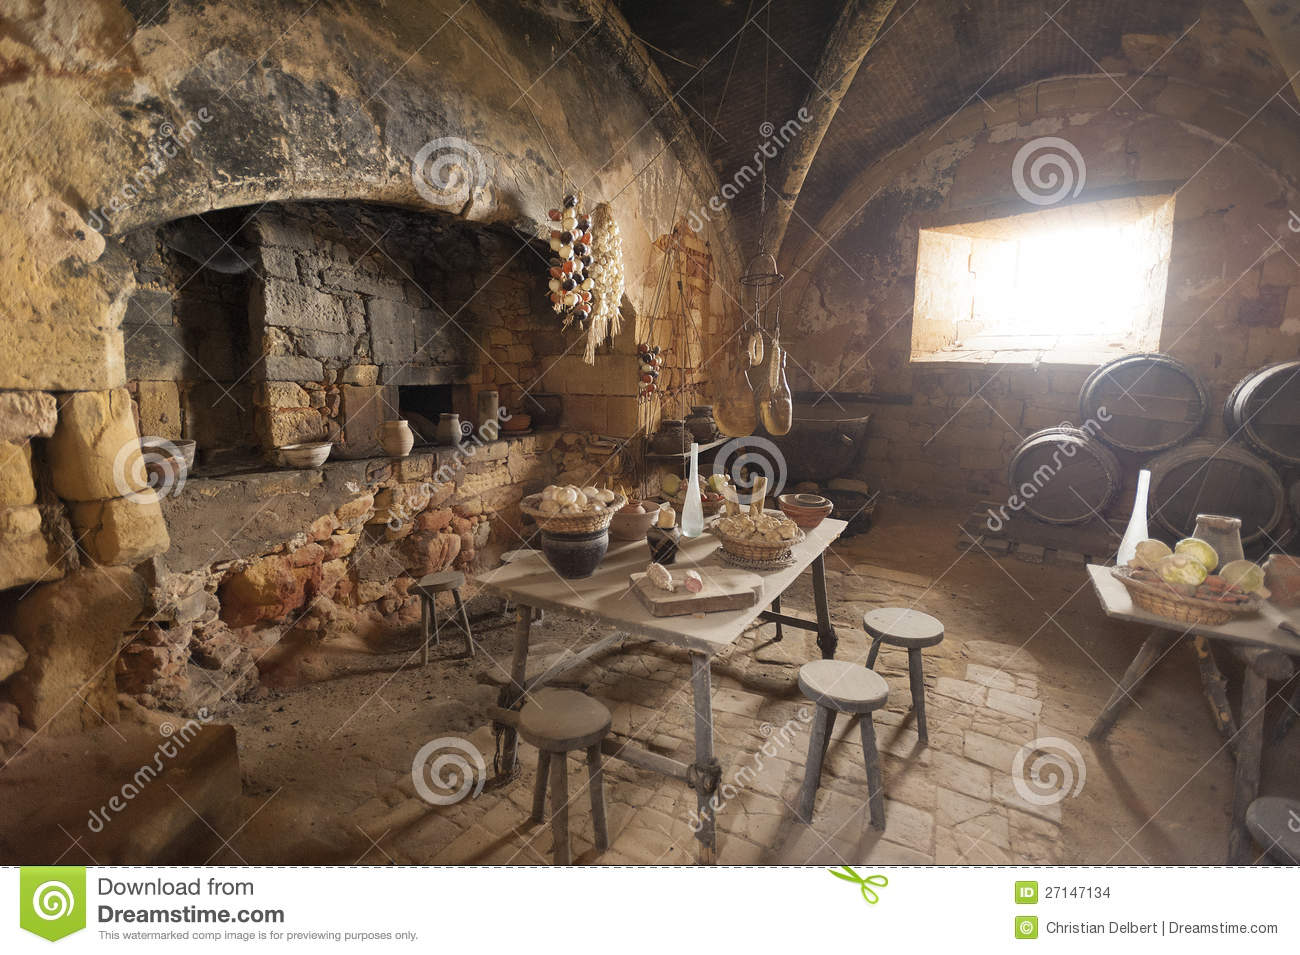 Medieval Kitchen And Dining Room Stock Images   Image  27147134